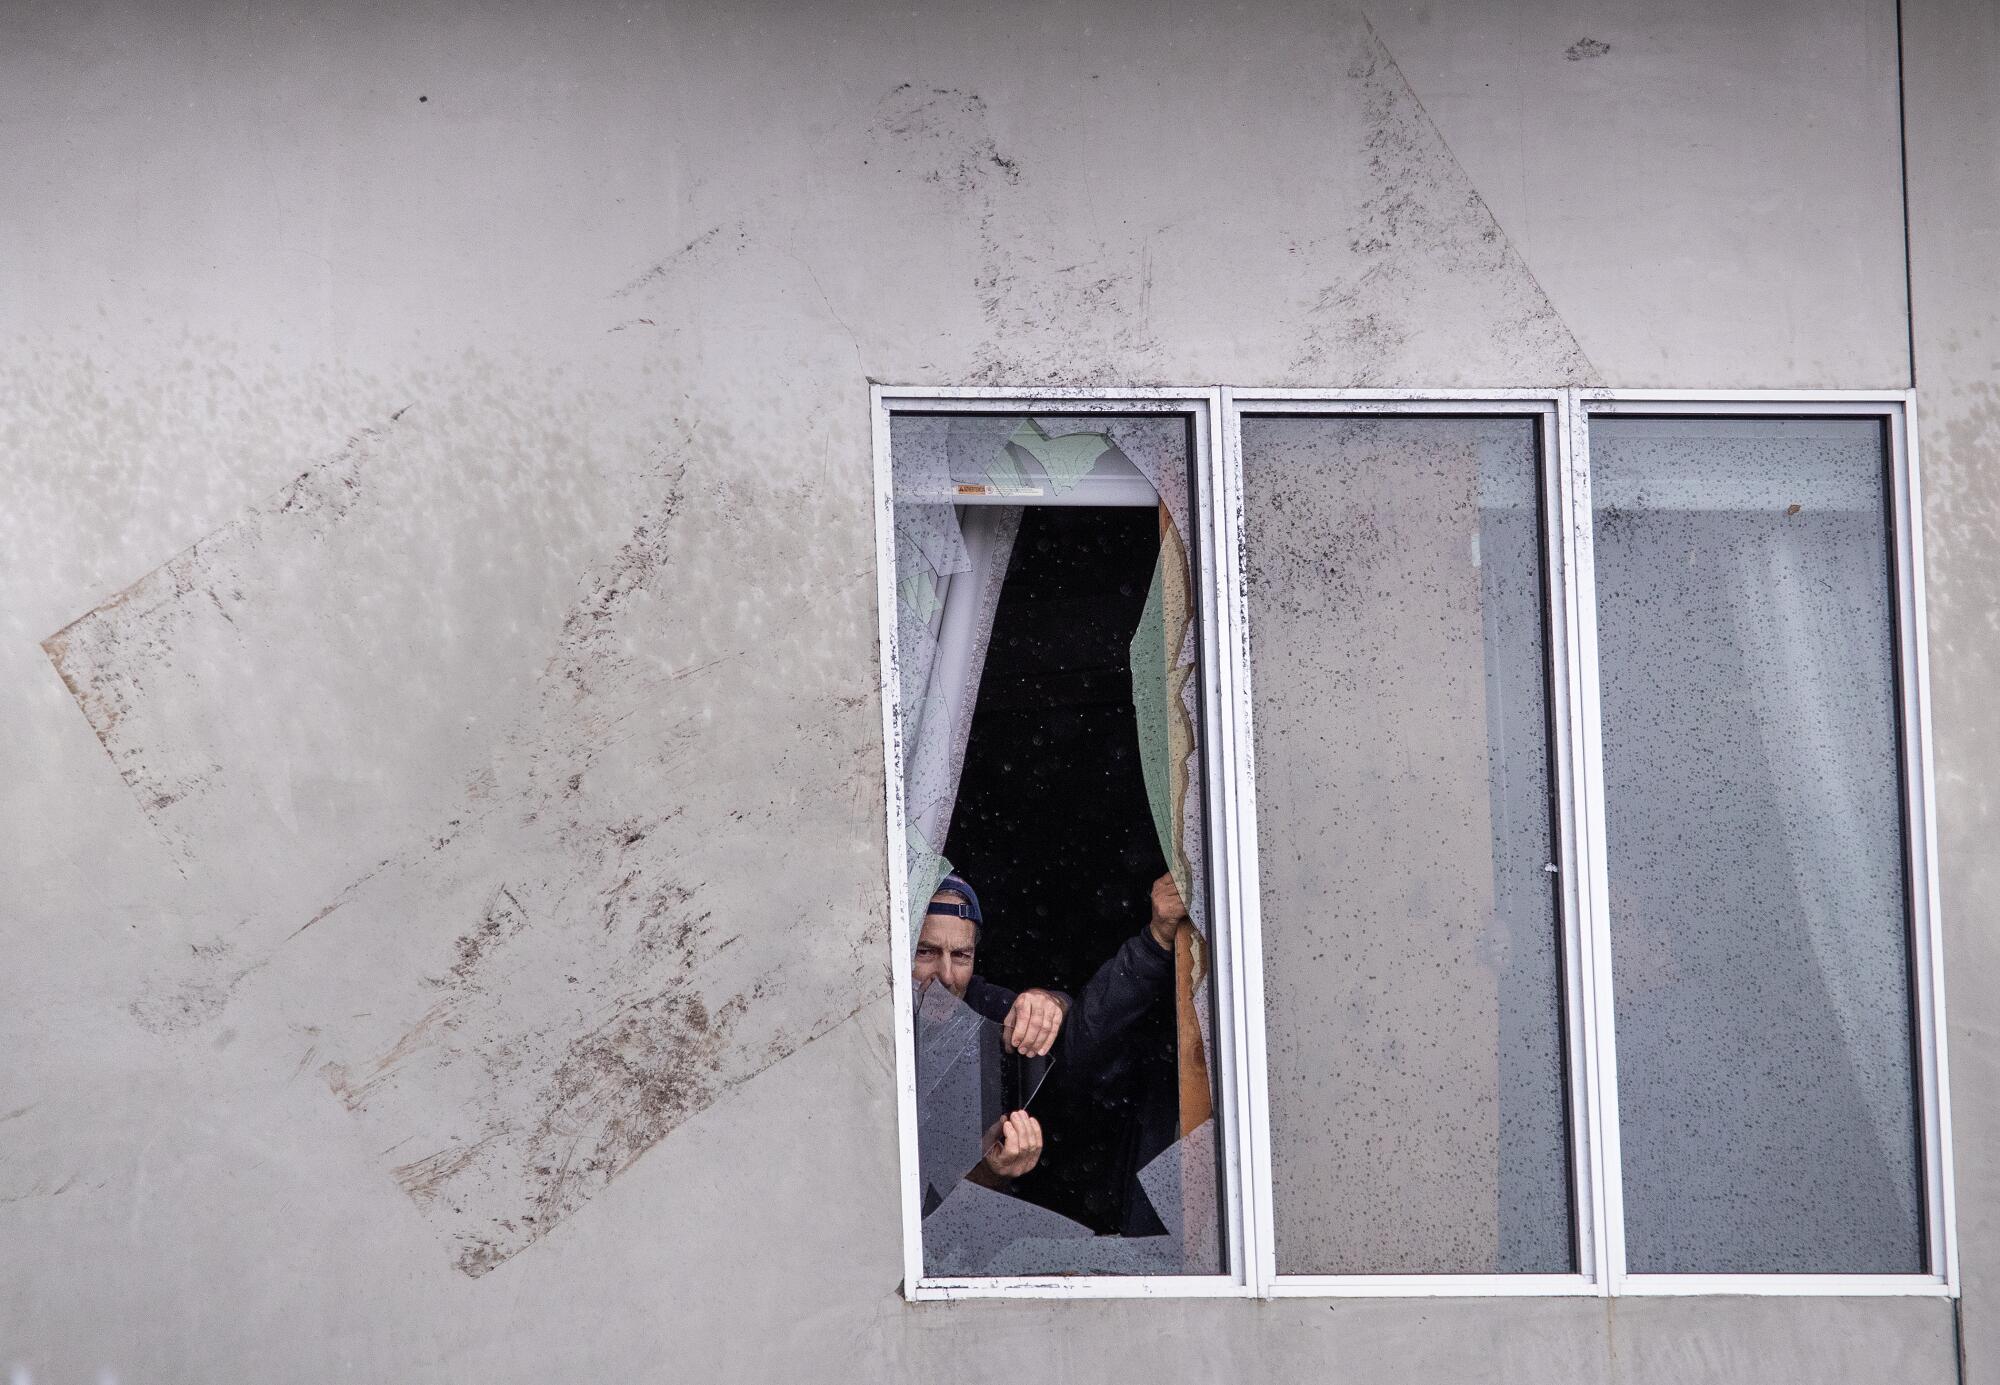 Workers remove broken glass from a window at a building in Montebello.